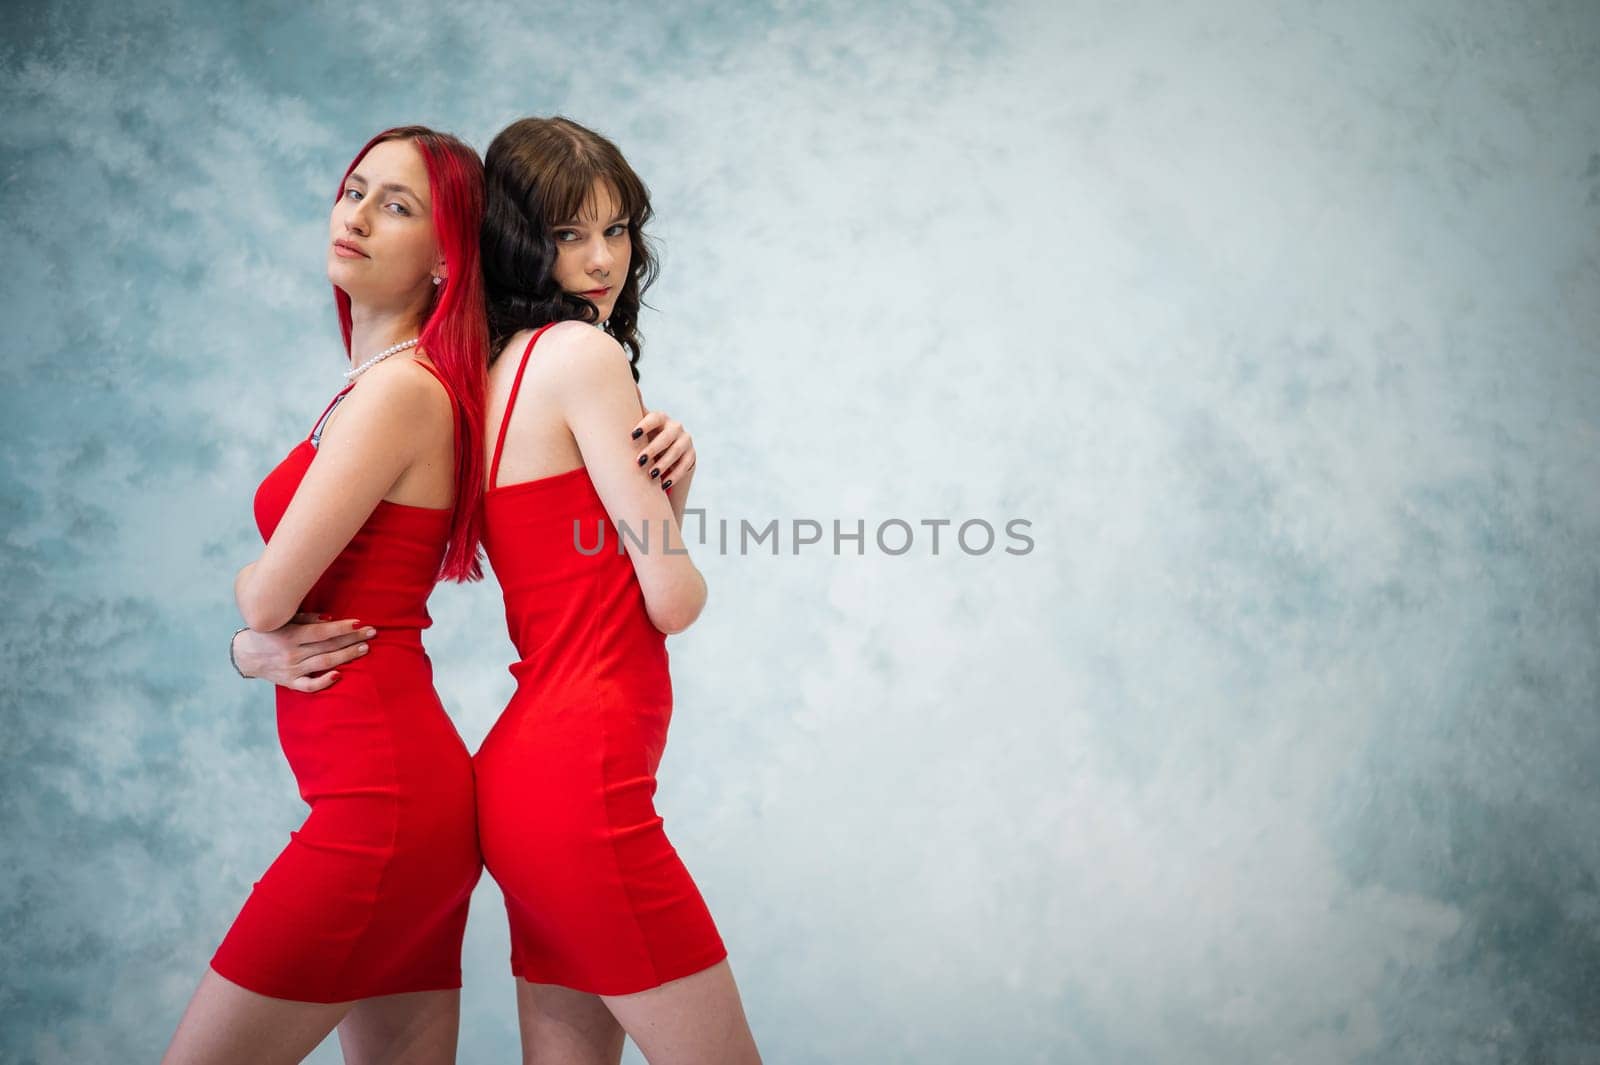 Portrait of two women dressed in identical red dresses and standing back to back. Lesbian intimacy